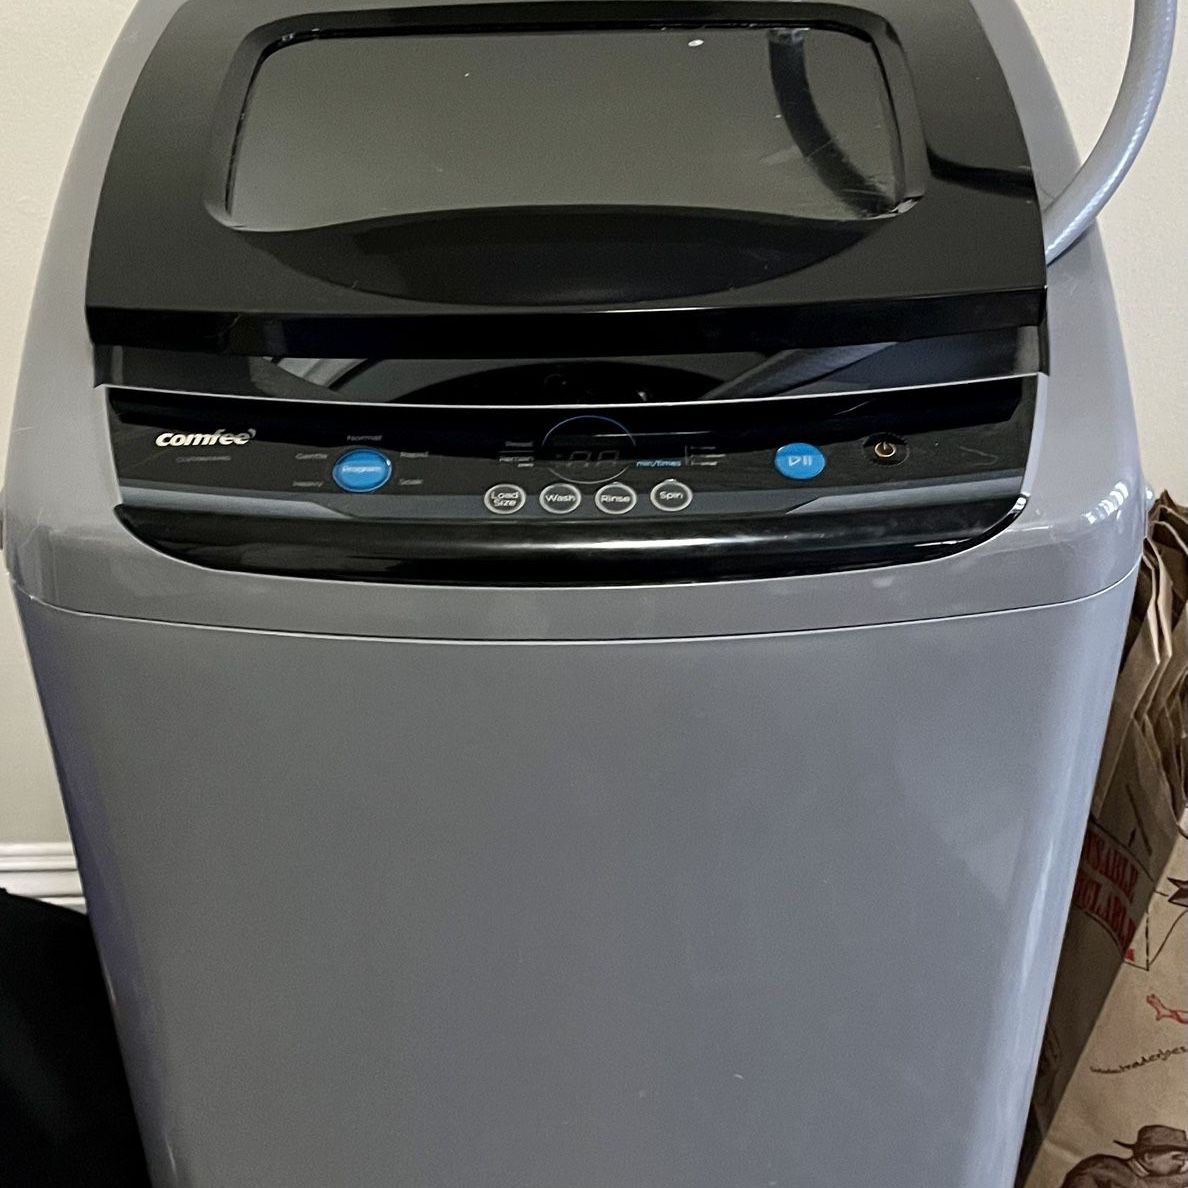 Black And Decker 0.9 Portable Washing Machine for Sale in Ravenna, OH -  OfferUp